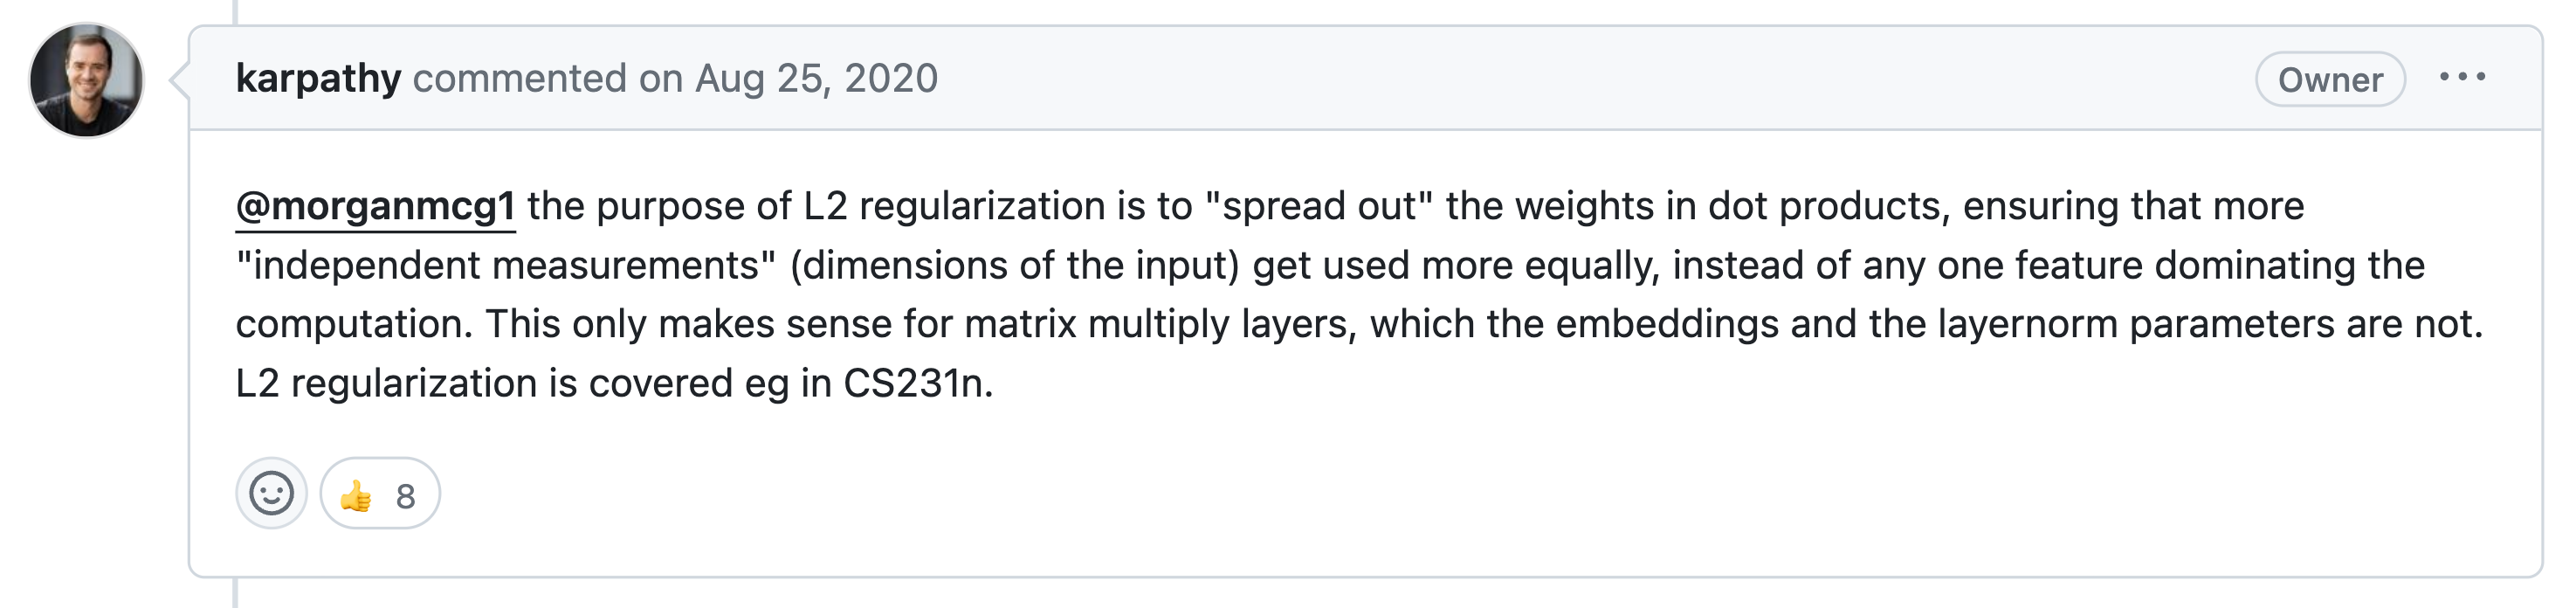 karpathy_comment_on_no_weight_decay